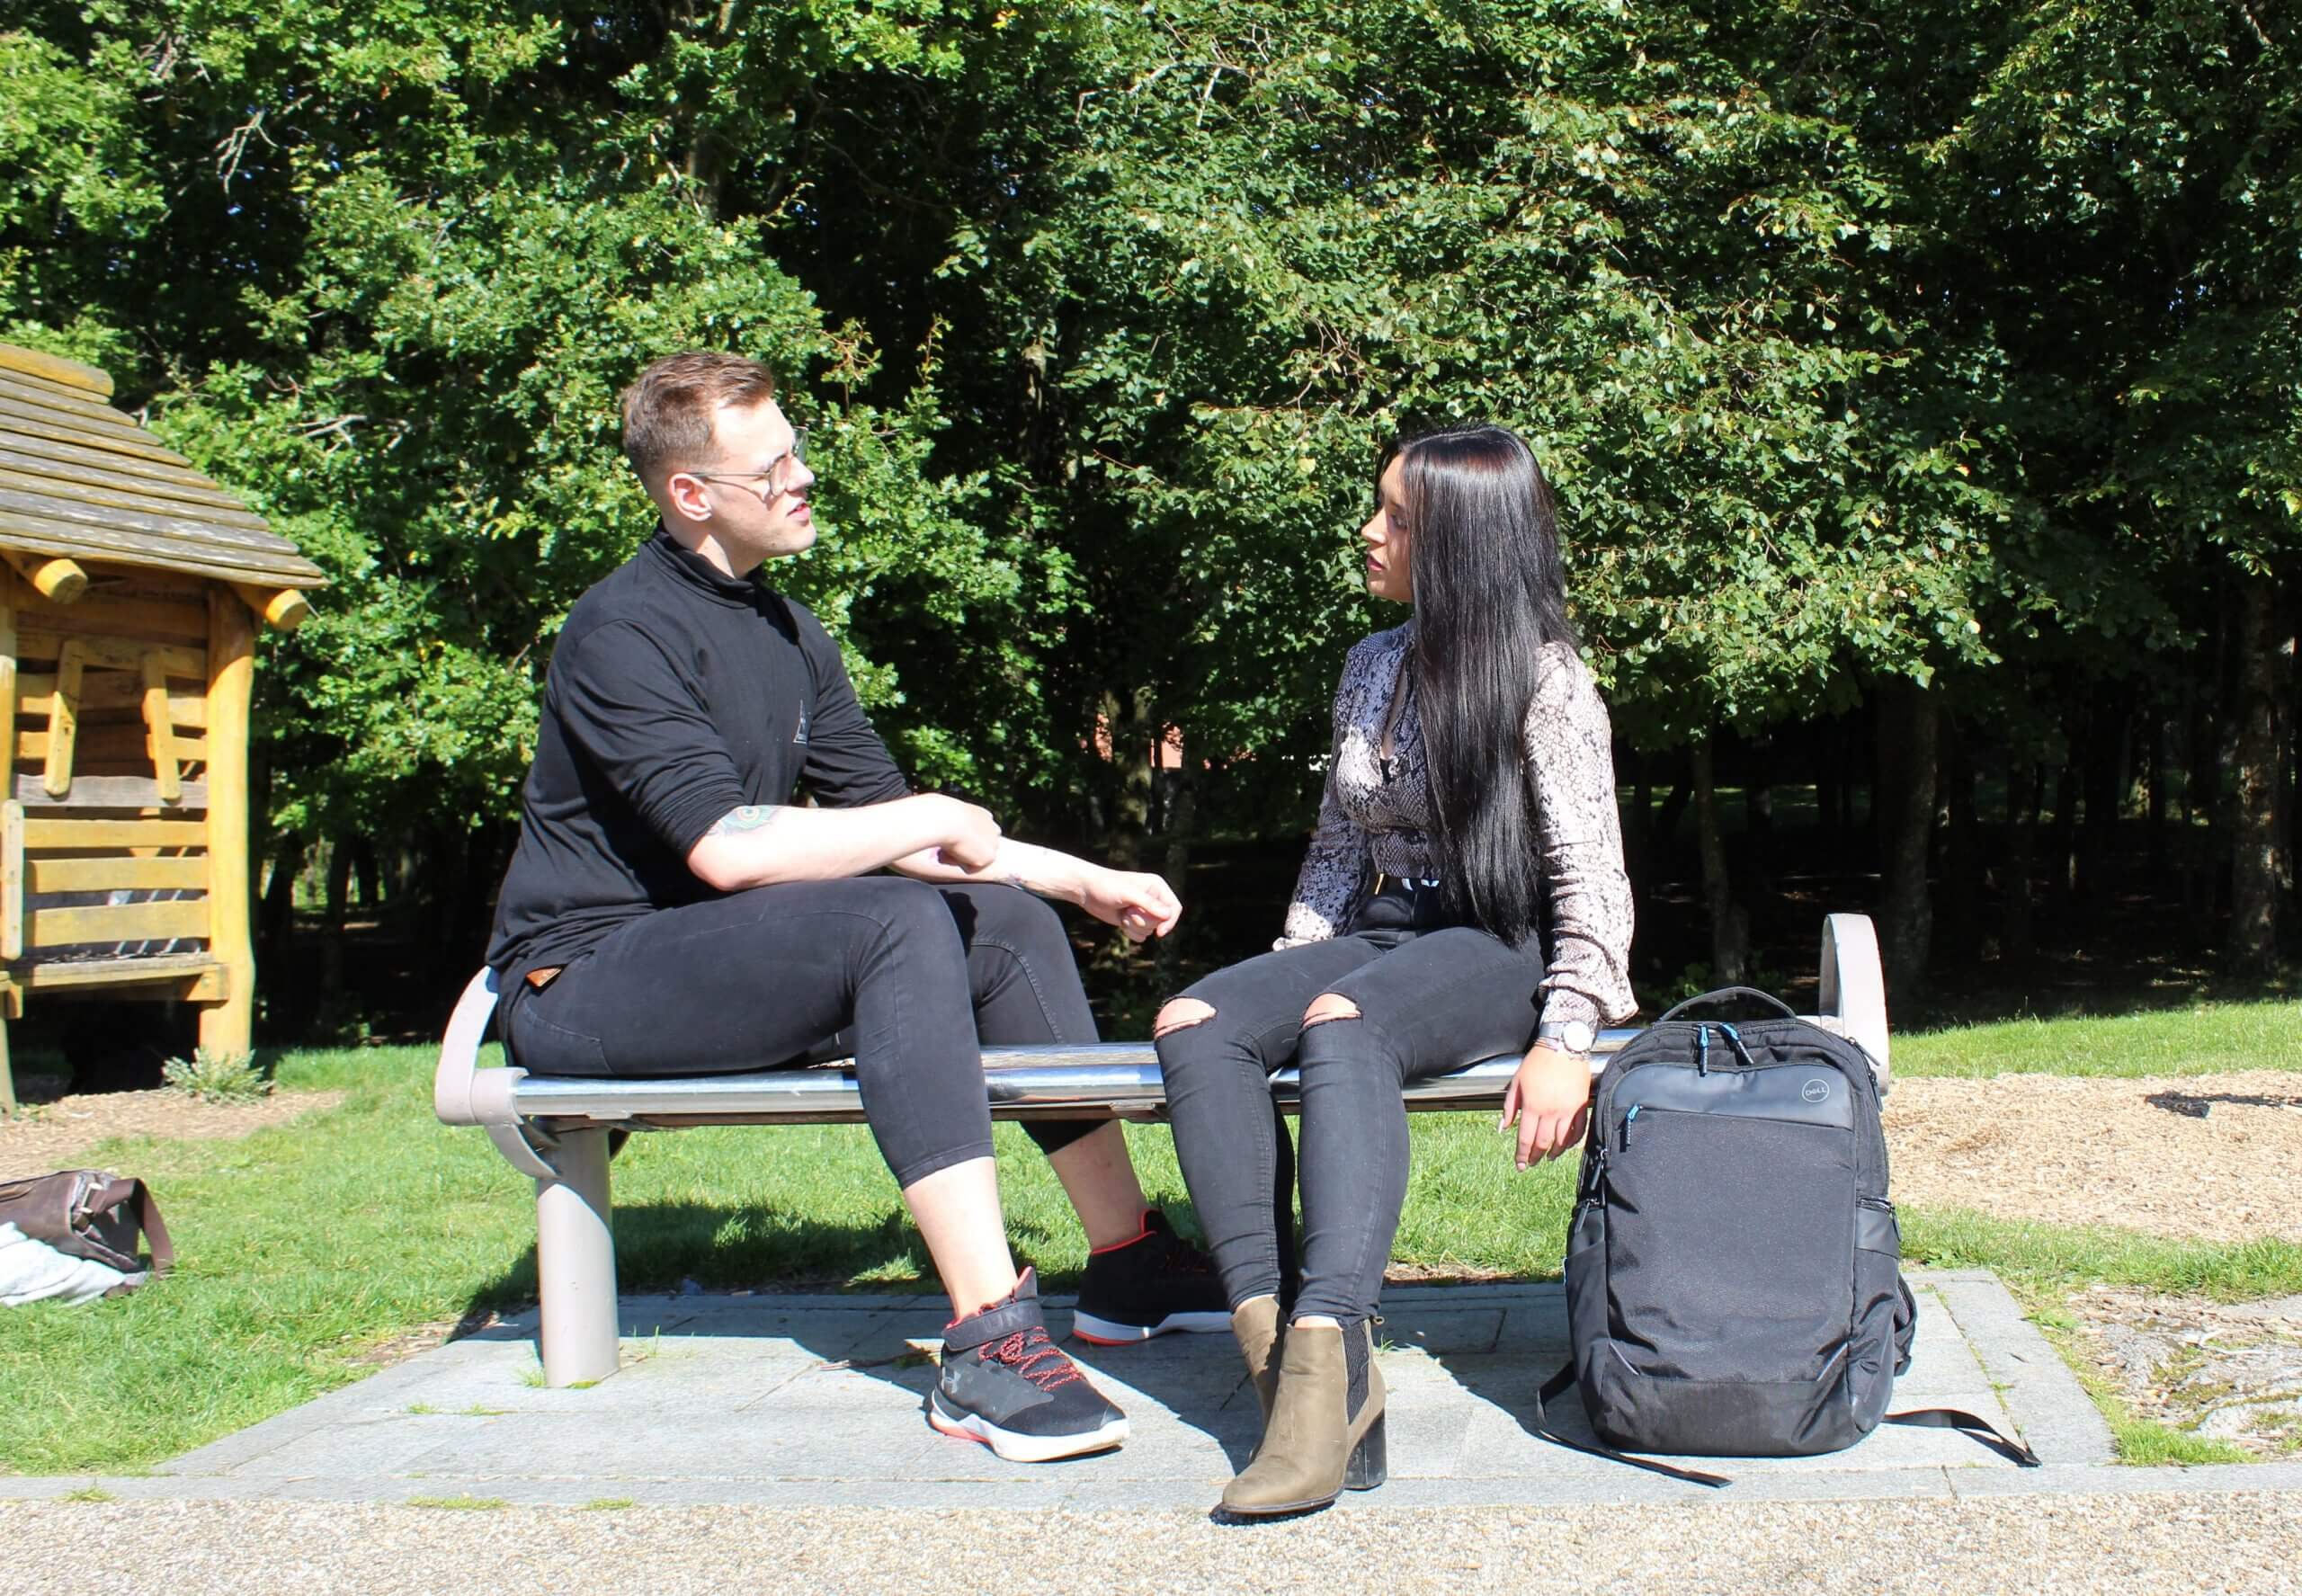 Two young people chatting on a park bench